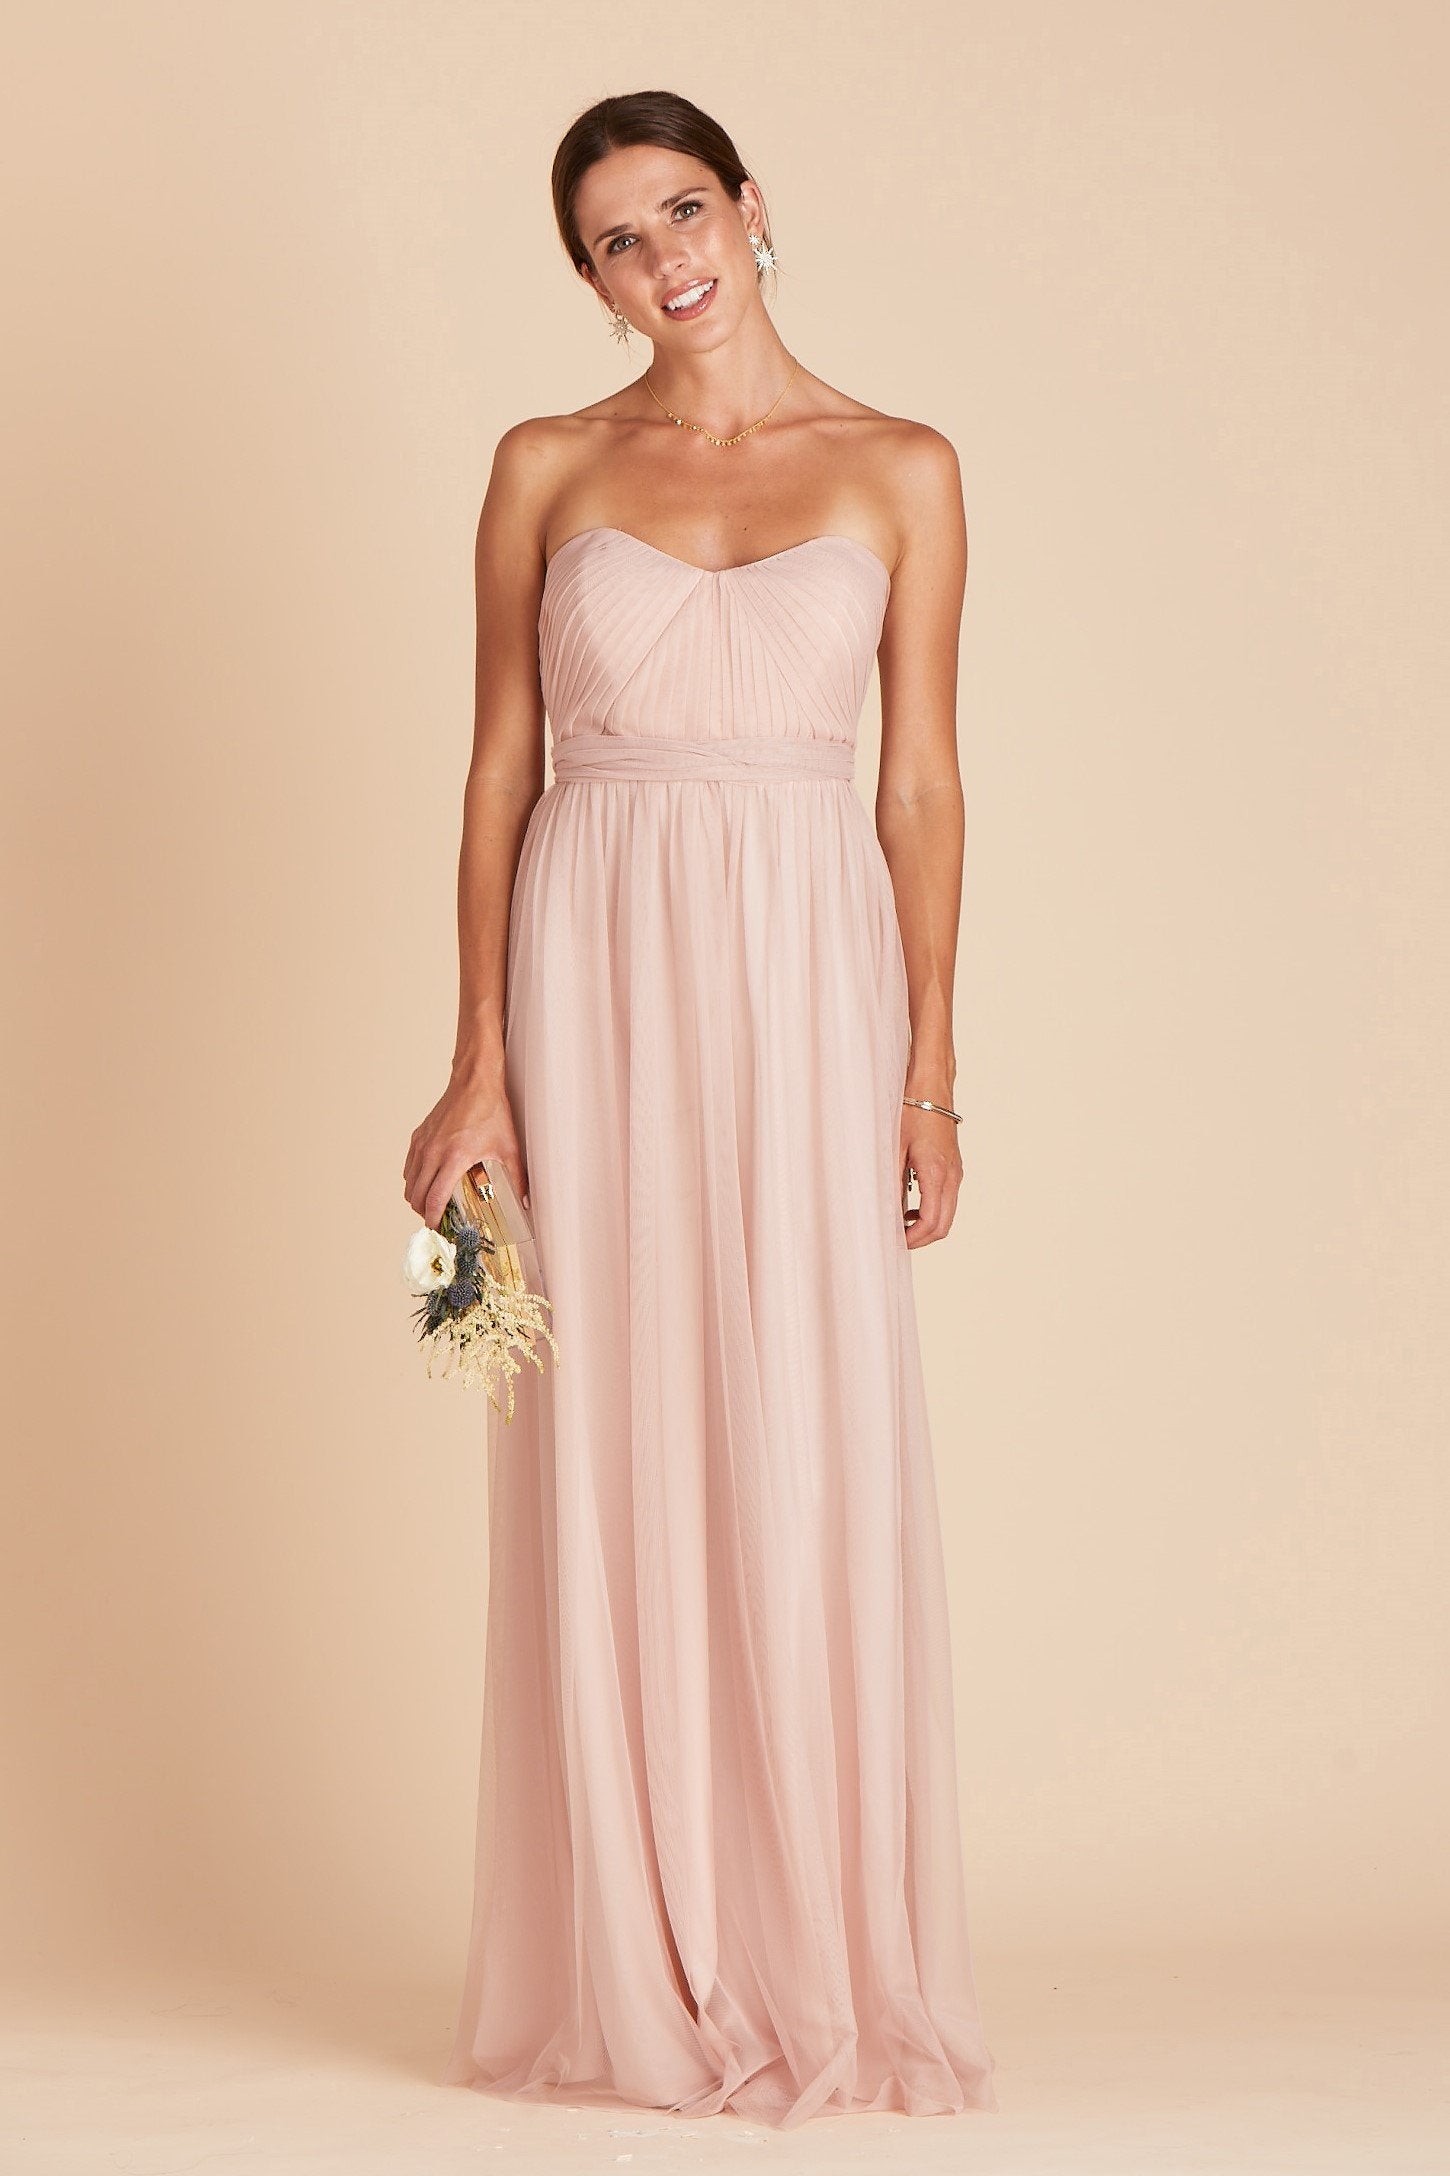 Christina convertible bridesmaid dress in vintage blush tulle by Birdy Grey, front view